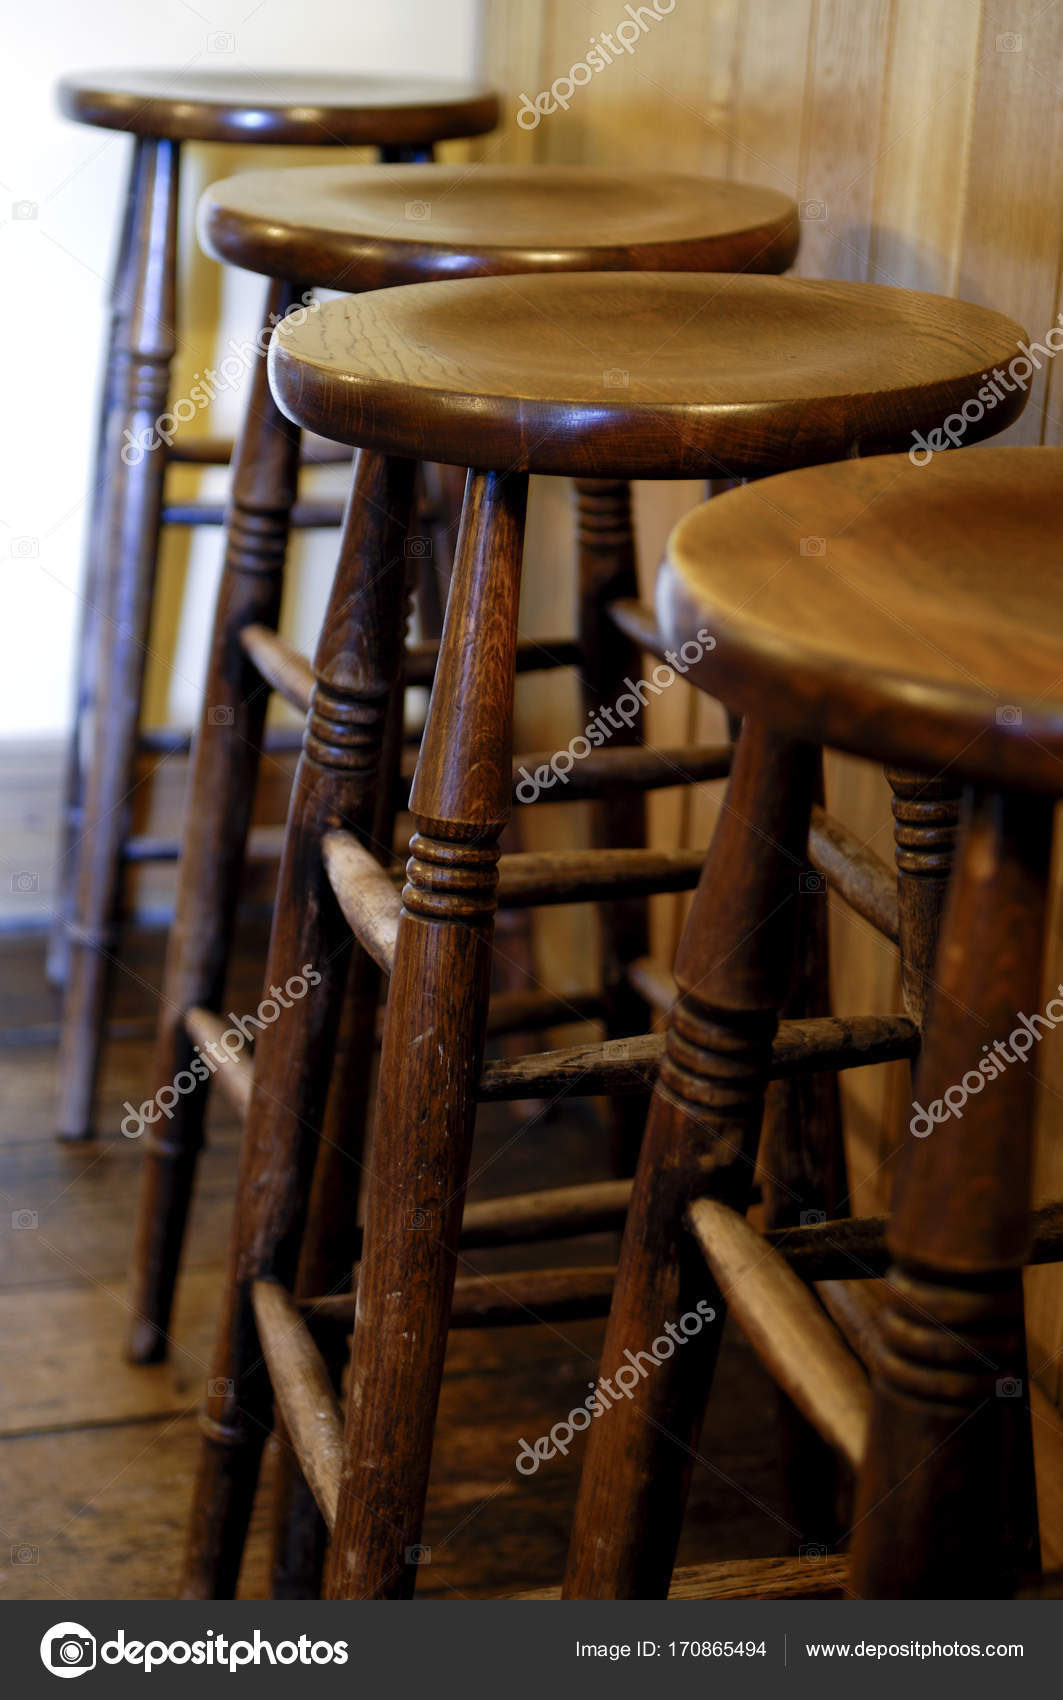 vintage wooden bar stools or chairs 170865494